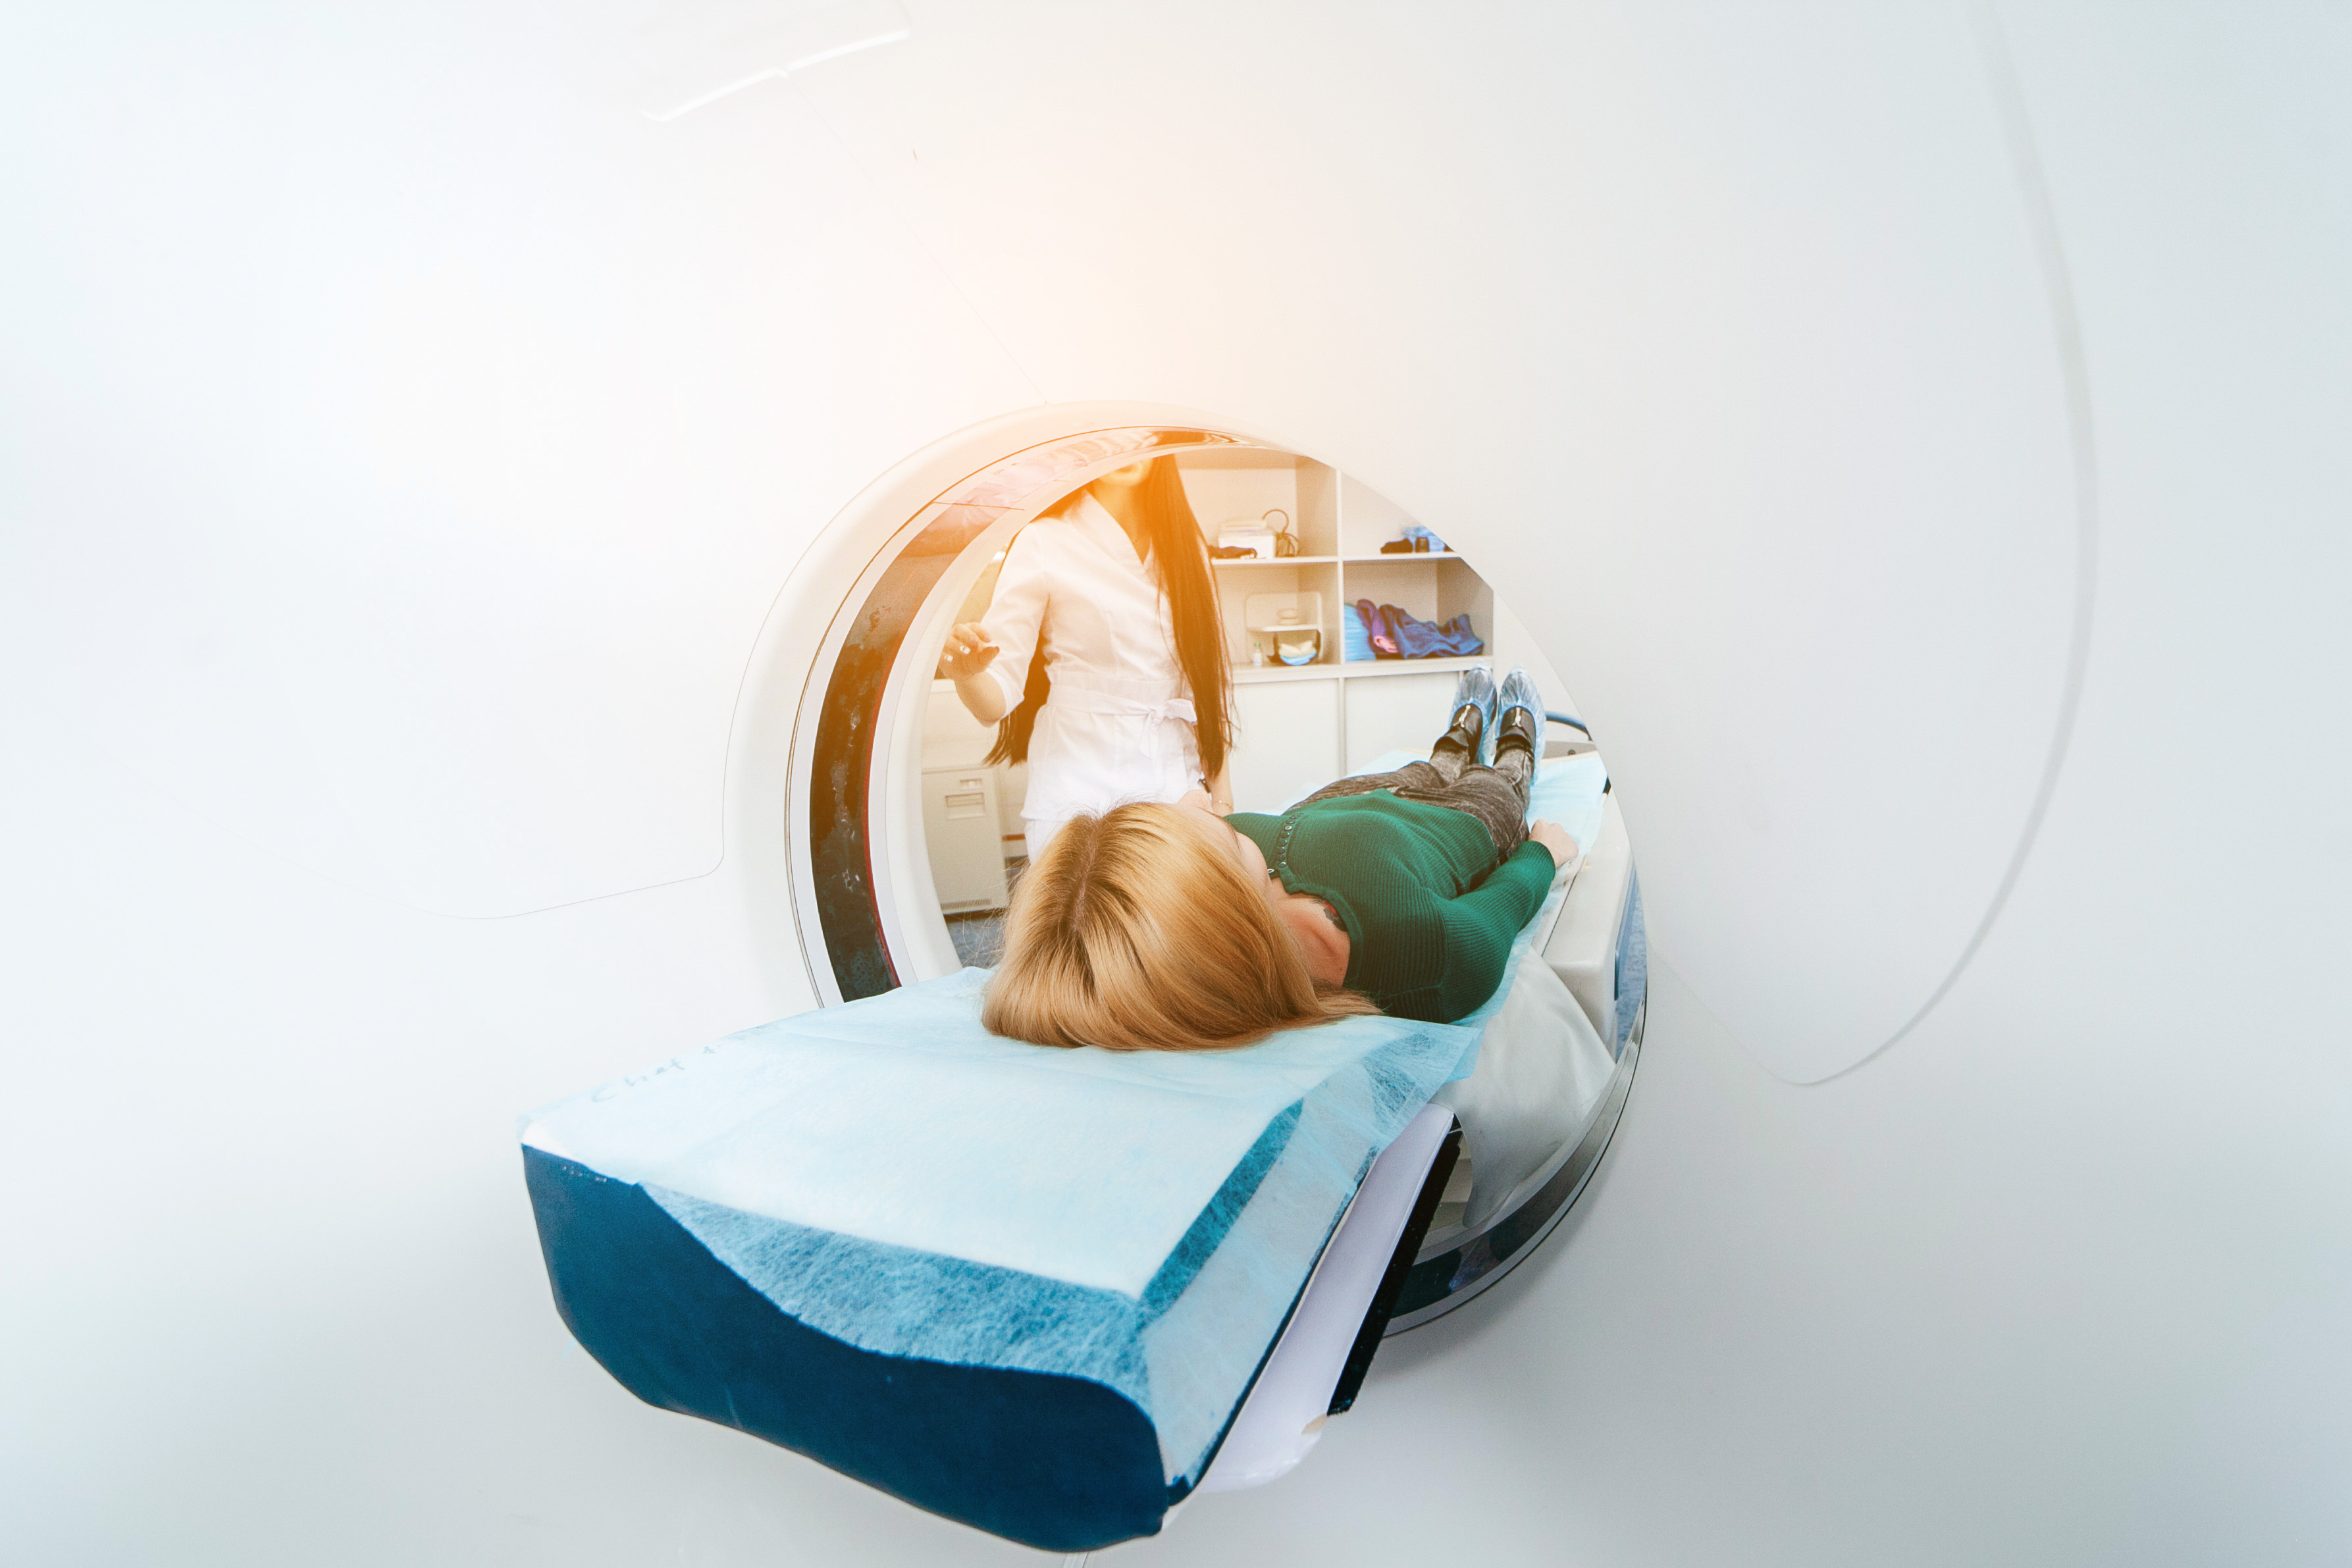 Picture of a MRI examination